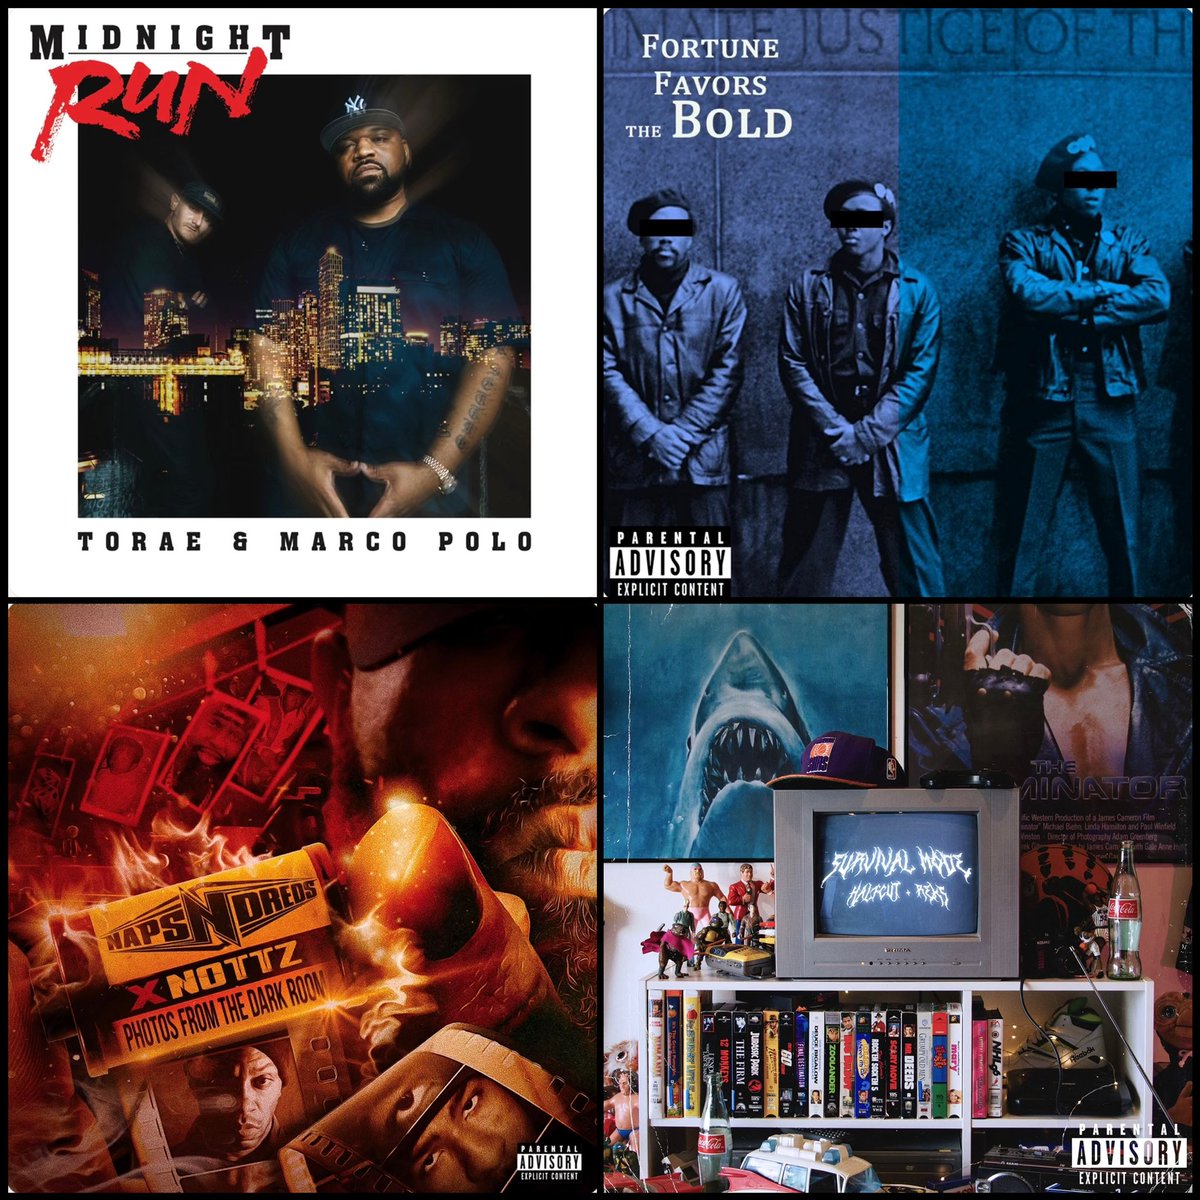 FRESH OUT THE BARBERSHOP Heavy Rotation:

Torae & Marco Polo “Midnight Run”

JUS-P & Body Bag Ben “Fortune Favors The Bold”

@NapsNdreds “Photos From The Darkroom”

Halfcut & Reks “Survival Mode”
…
#2023HIPHOP
#EachOneTeachOne
#FreshOutTheBarbershop